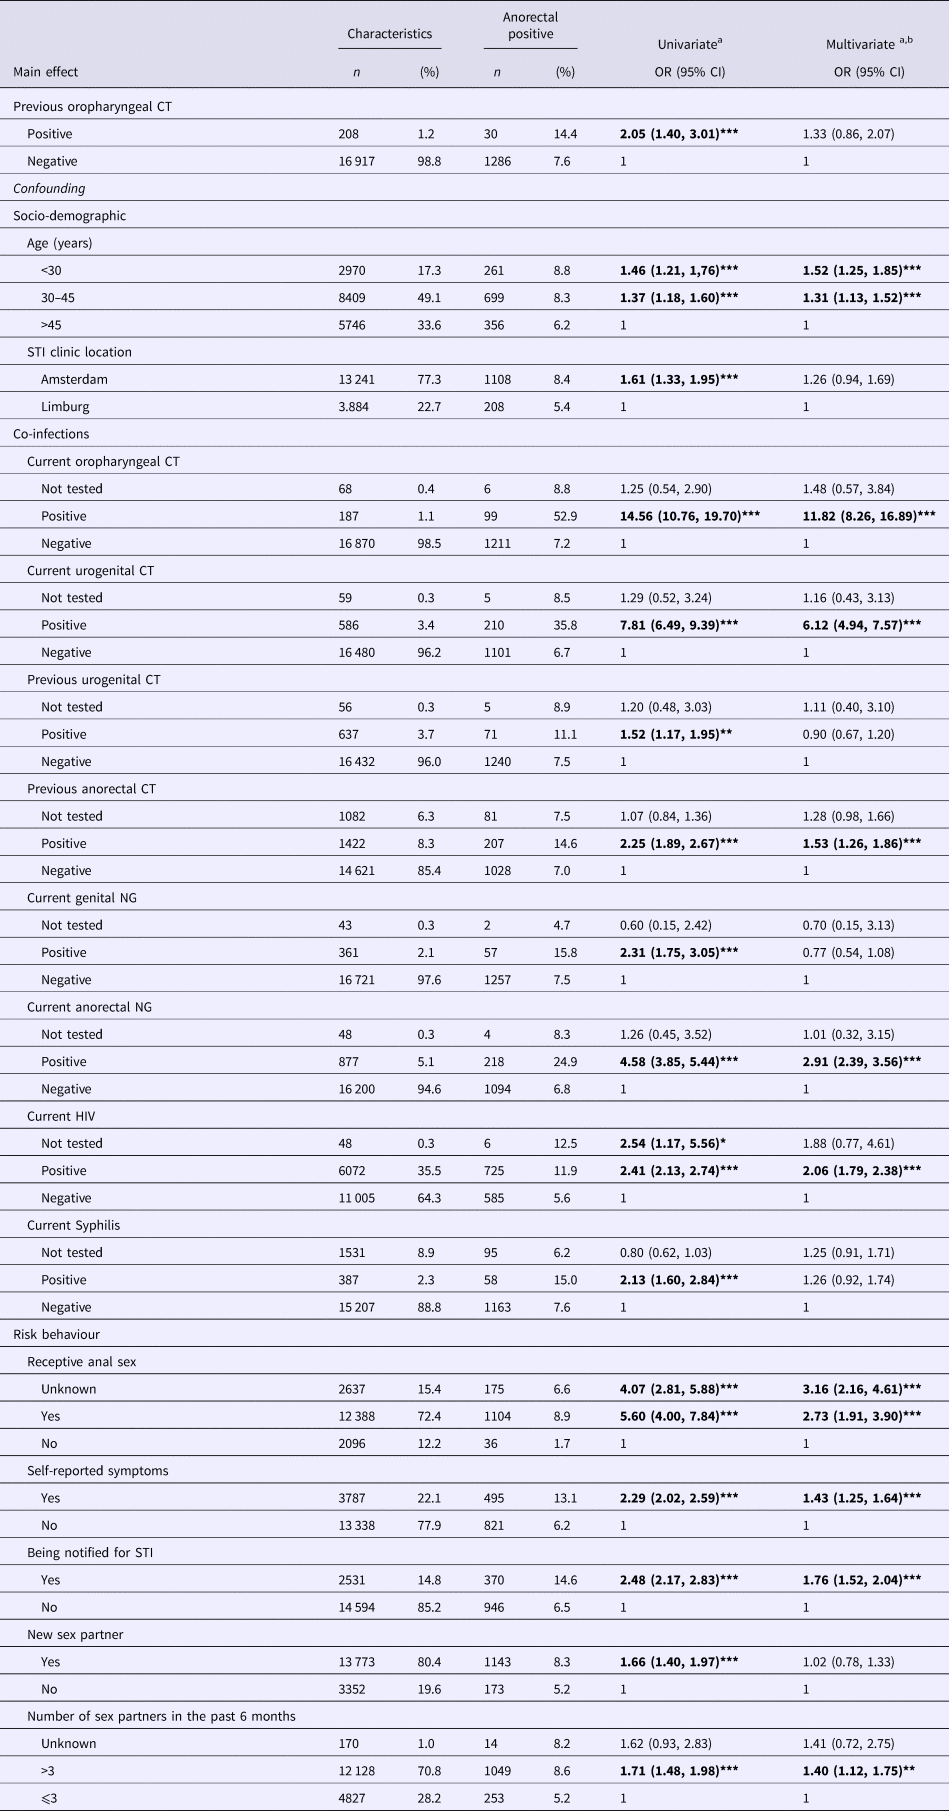 A longitudinal study to investigate previous Chlamydia trachomatis infection as a risk factor for subsequent anorectal infection in men who have sex with men (MSM) and women visiting STI clinics in pic